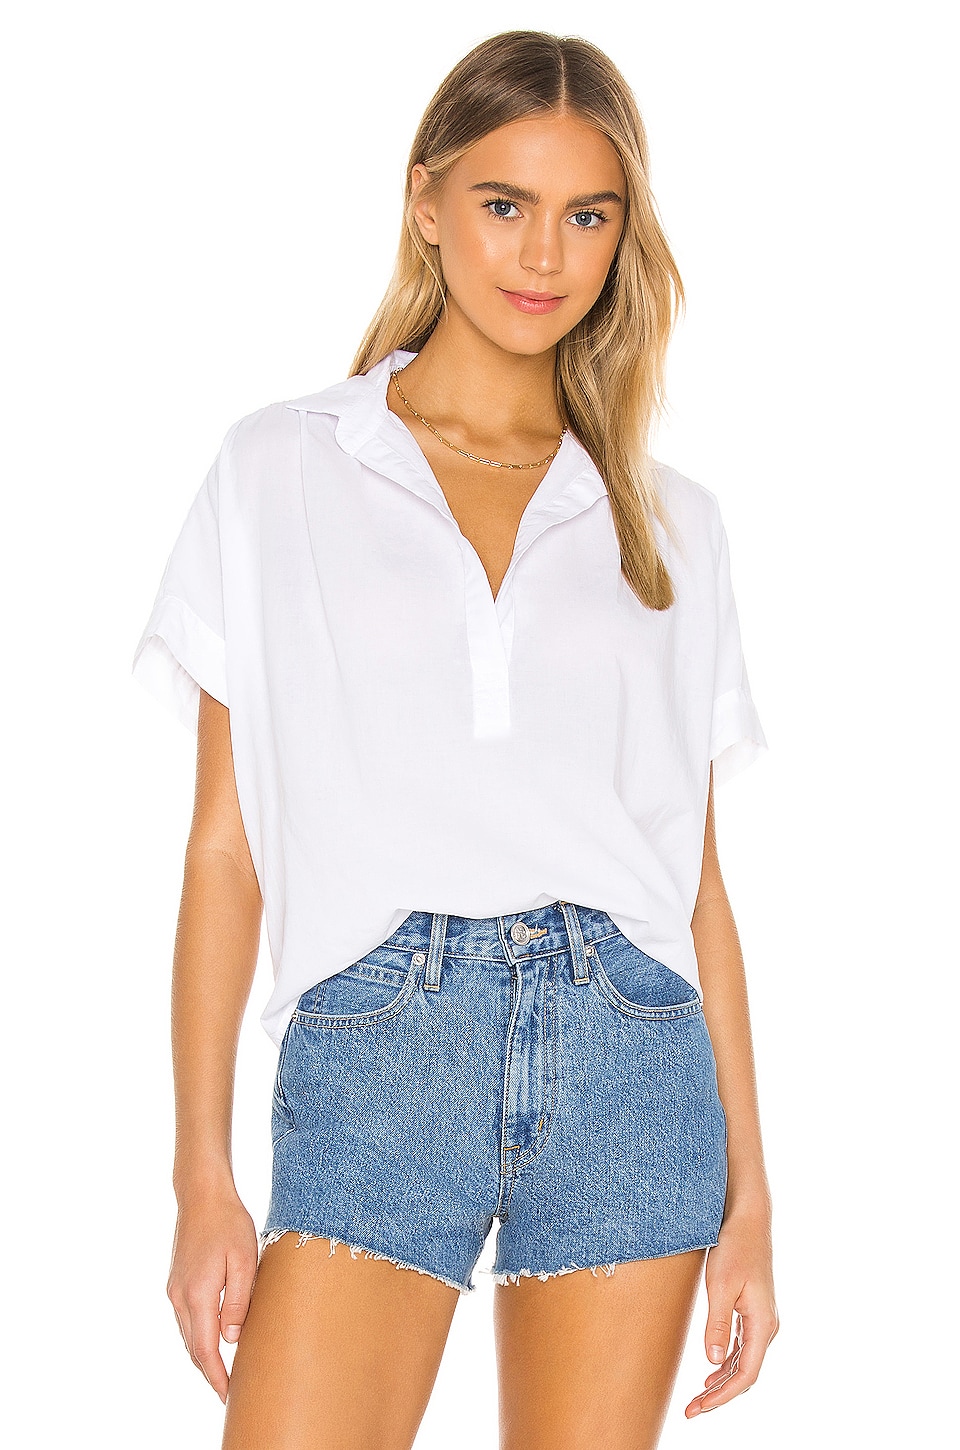 Cali Dreaming The Motley Top in Pure | REVOLVE